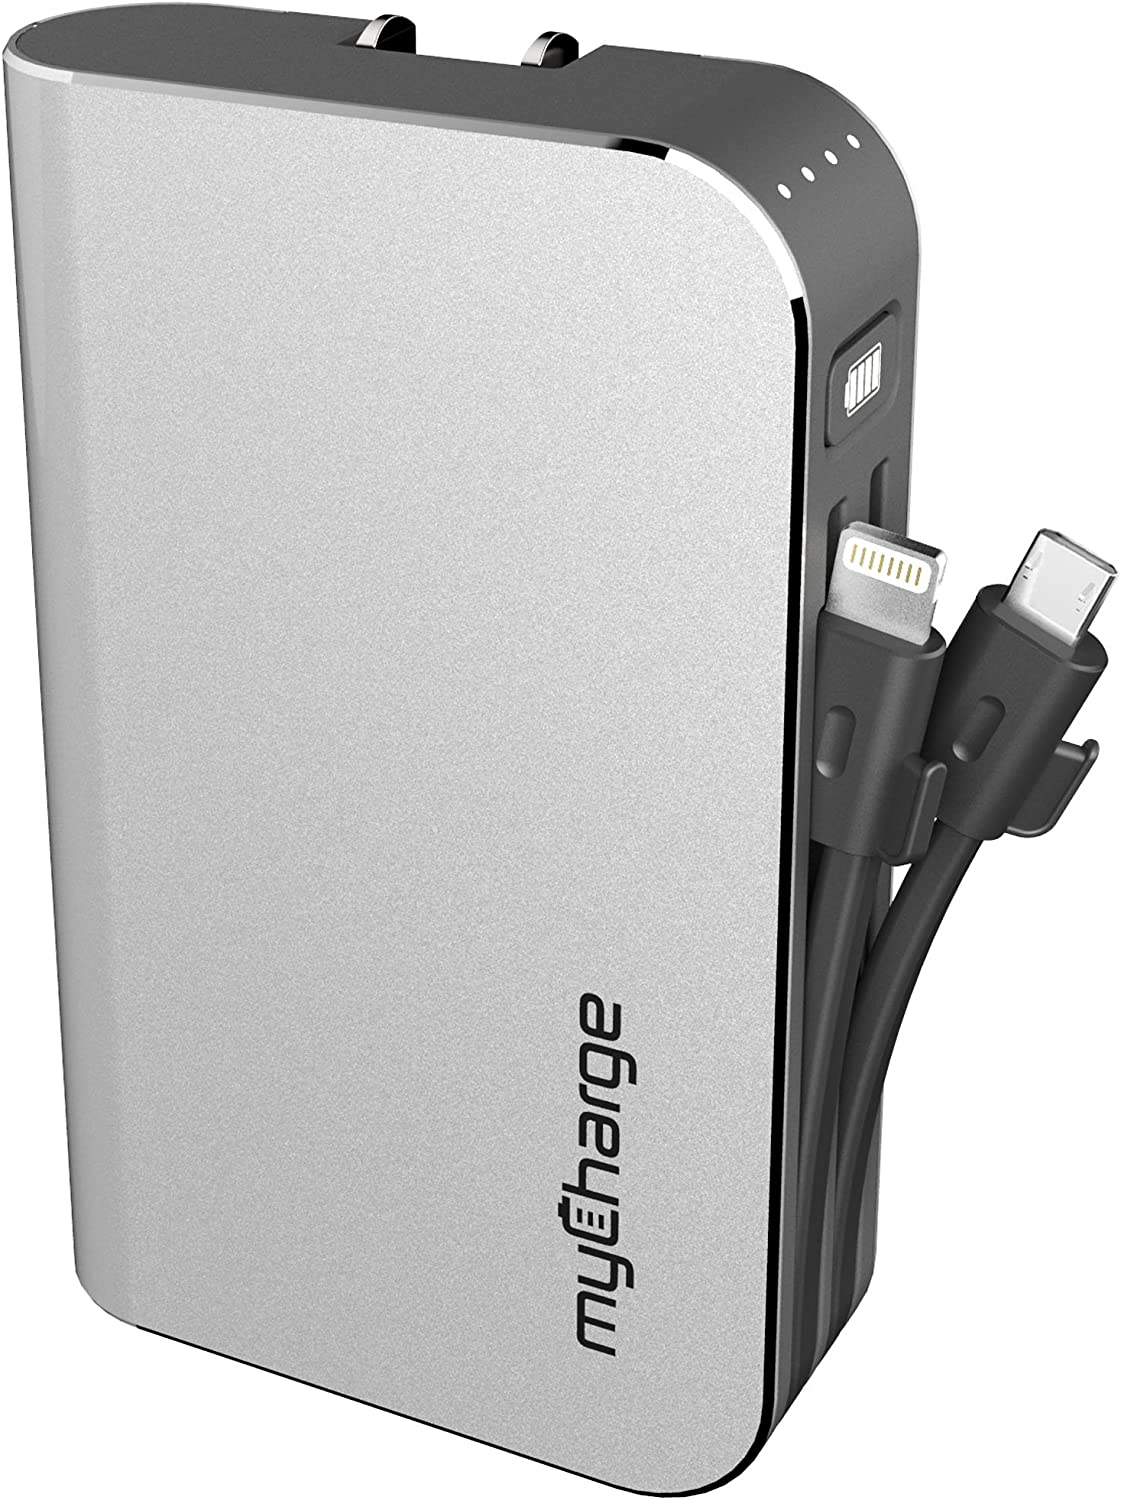 myCharge - HB44V-A HUBXTRA 4400 mAh Portable Charger for Most Lightning-Equipped Apple® Devices - Gray